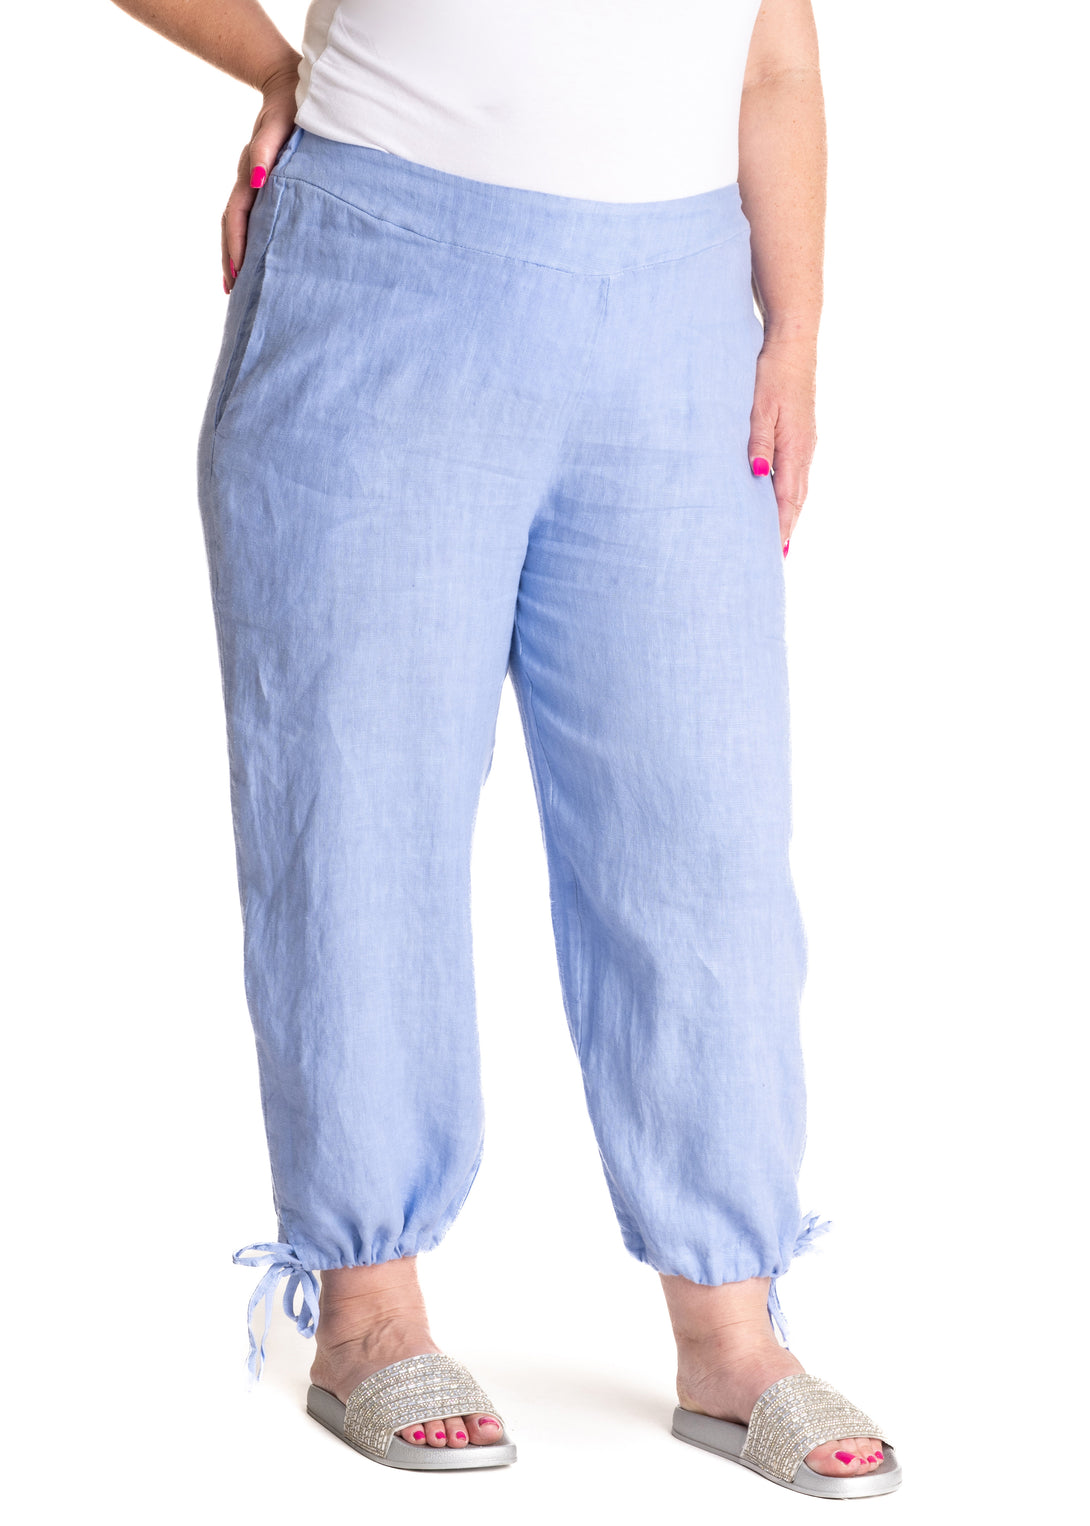 River Pants in Periwinkle - Imagine Fashion